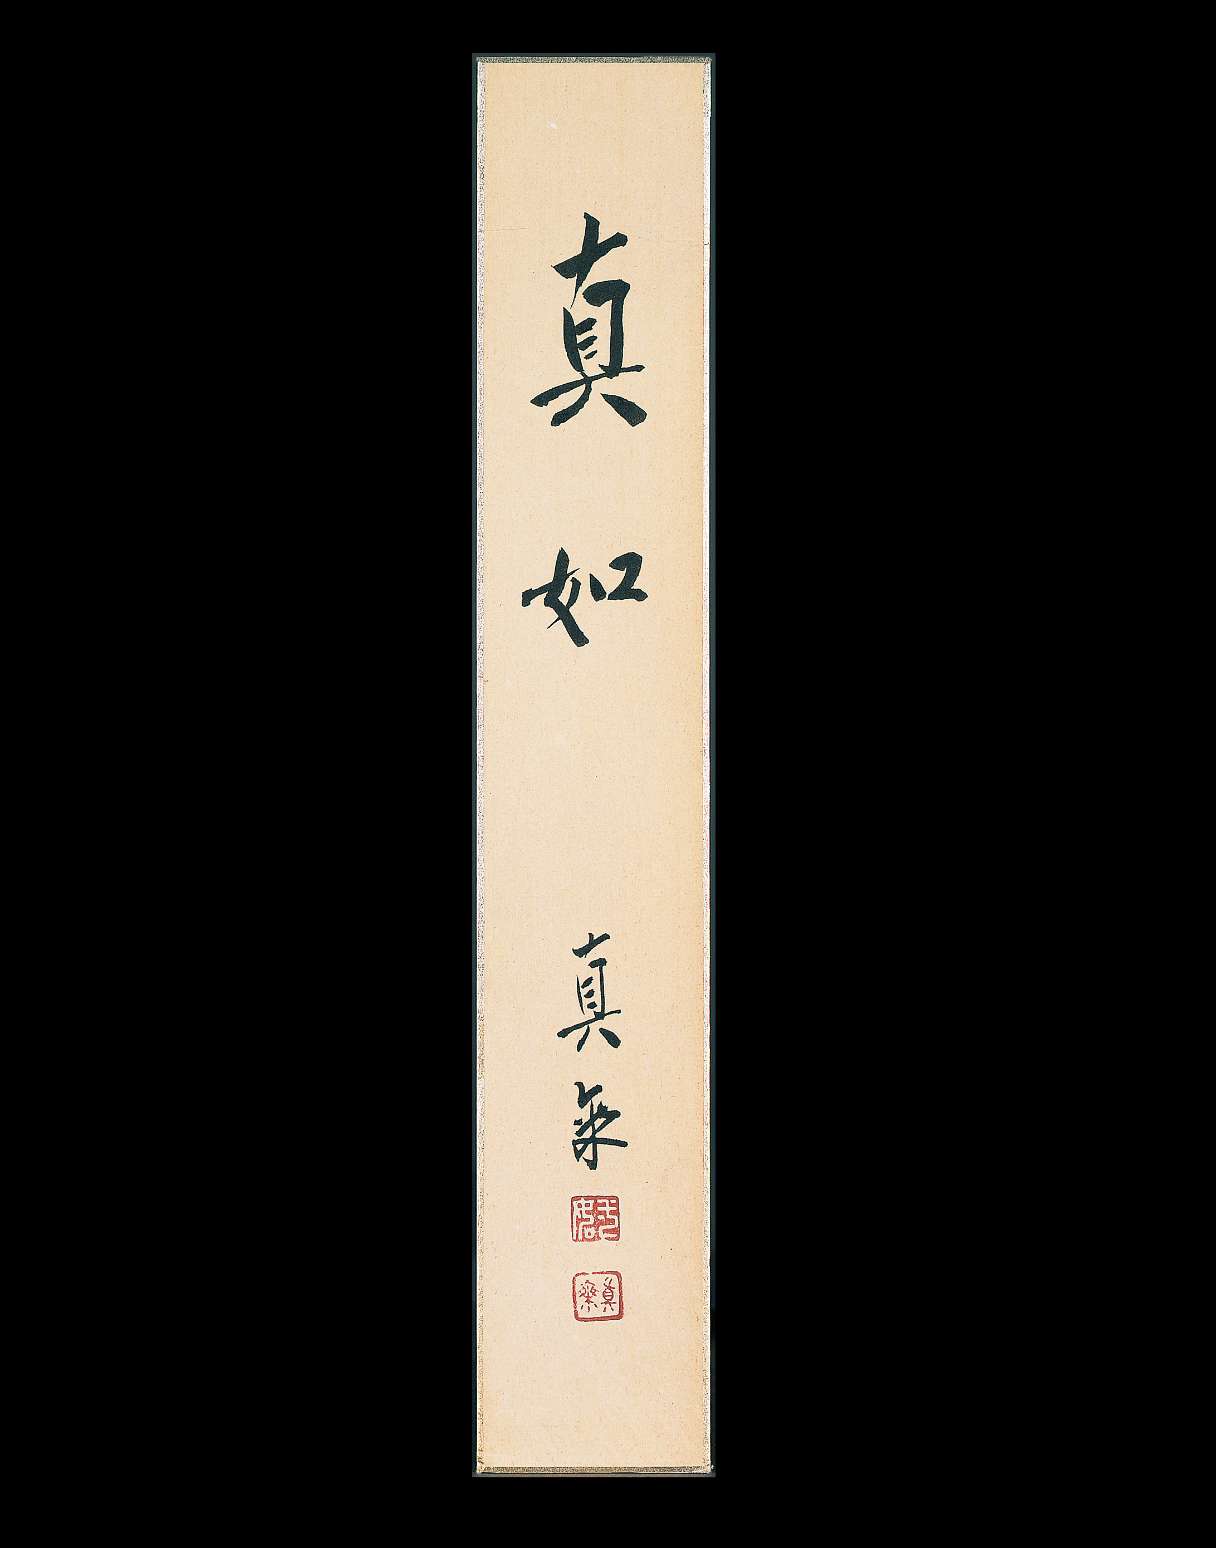 A very long, vertically oriented paper scroll has bold Japanese calligraphy characters written on it in black ink; two square shaped stamps have been impressed on the paper beneath in red.